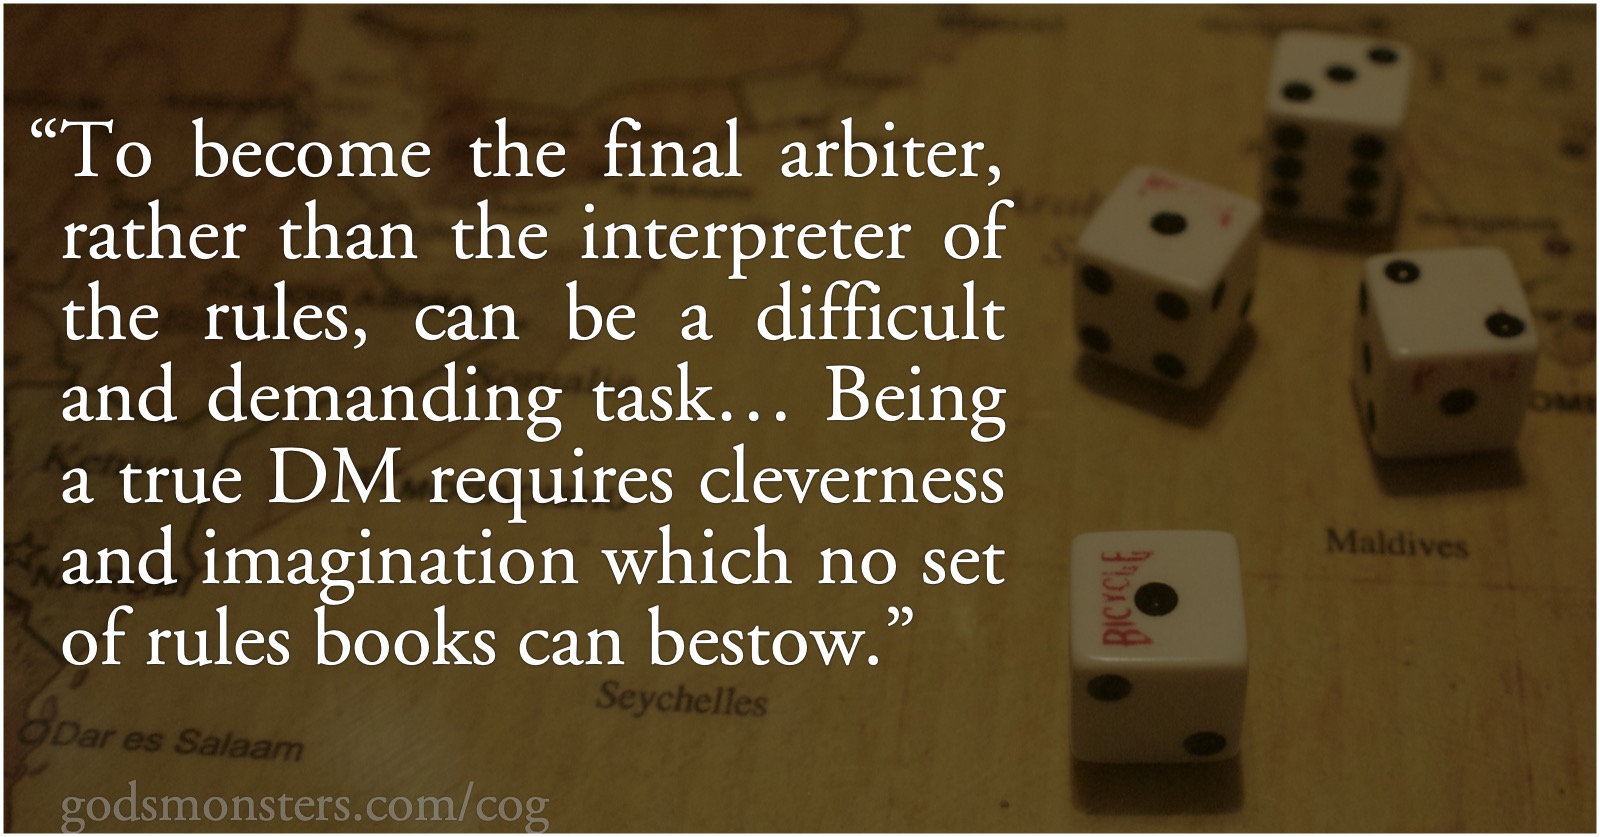 Final Arbiter meme: “To become the final arbiter, rather than the interpreter of the rules, can be a difficult and demanding task… Being a true DM requires cleverness and imagination which no set of rules books can bestow.”; game masters; Gary Gygax; game rules